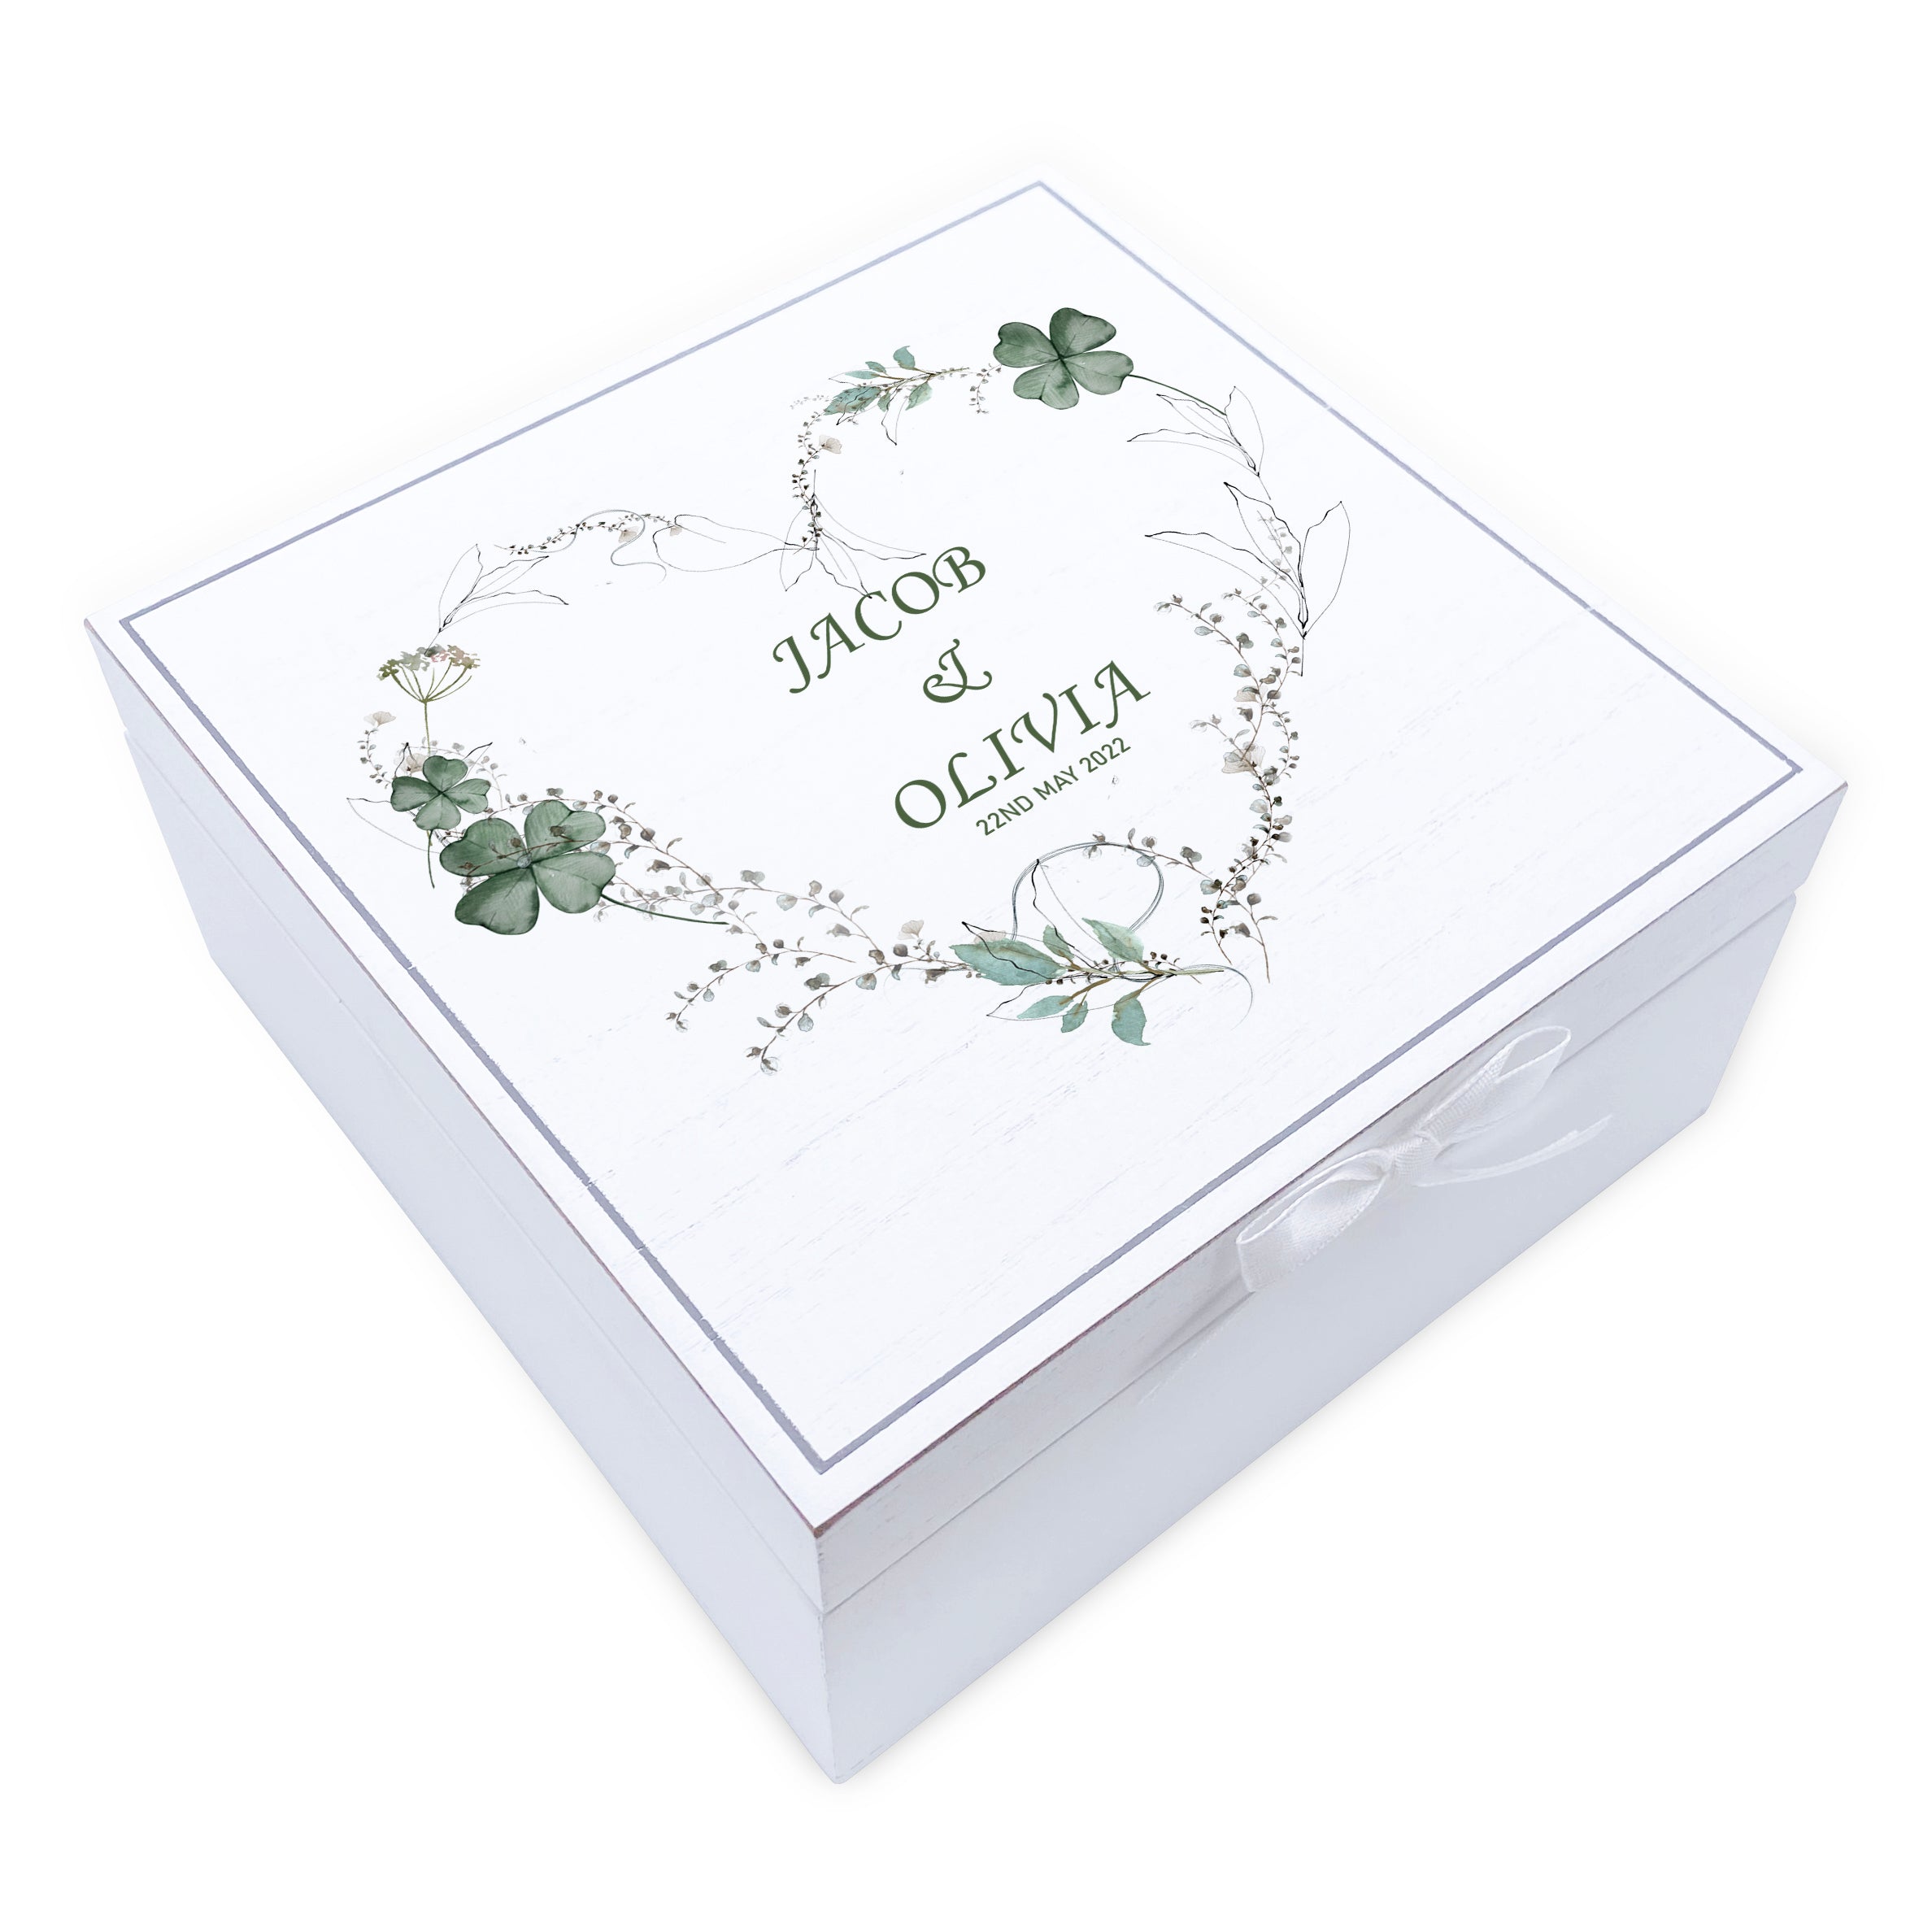 Personalised Wedding Day Vintage Wooden Keepsake Box Gift With Green Clover Heart Print